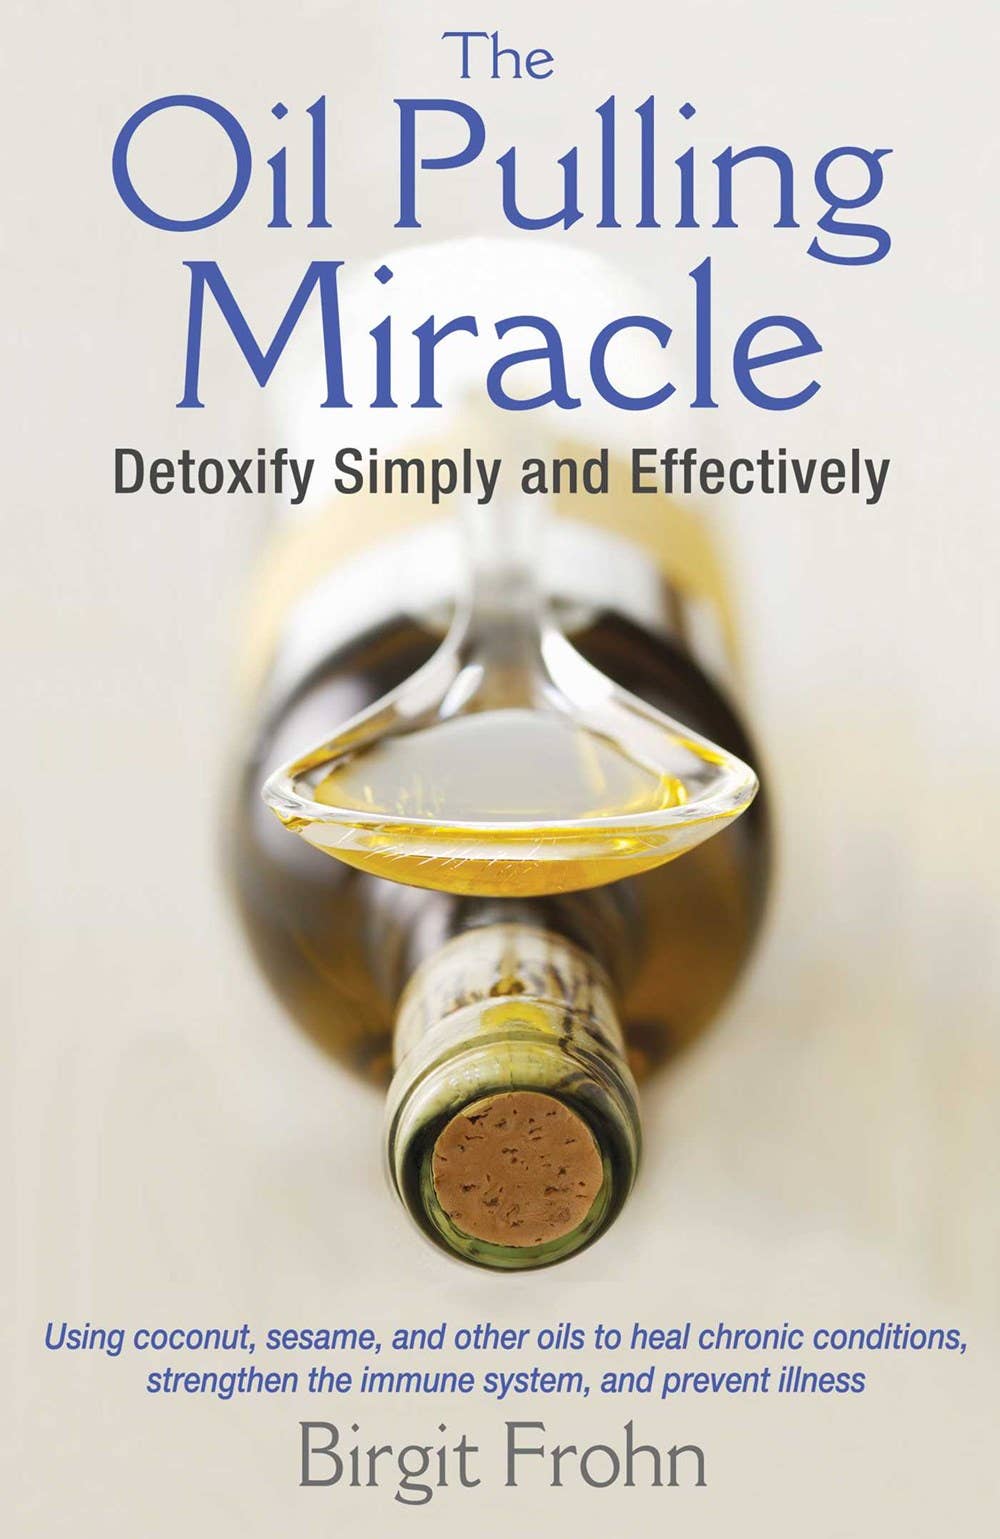 Oil Pulling Miracle: Detoxify Simply and Effectively - Spiral Circle